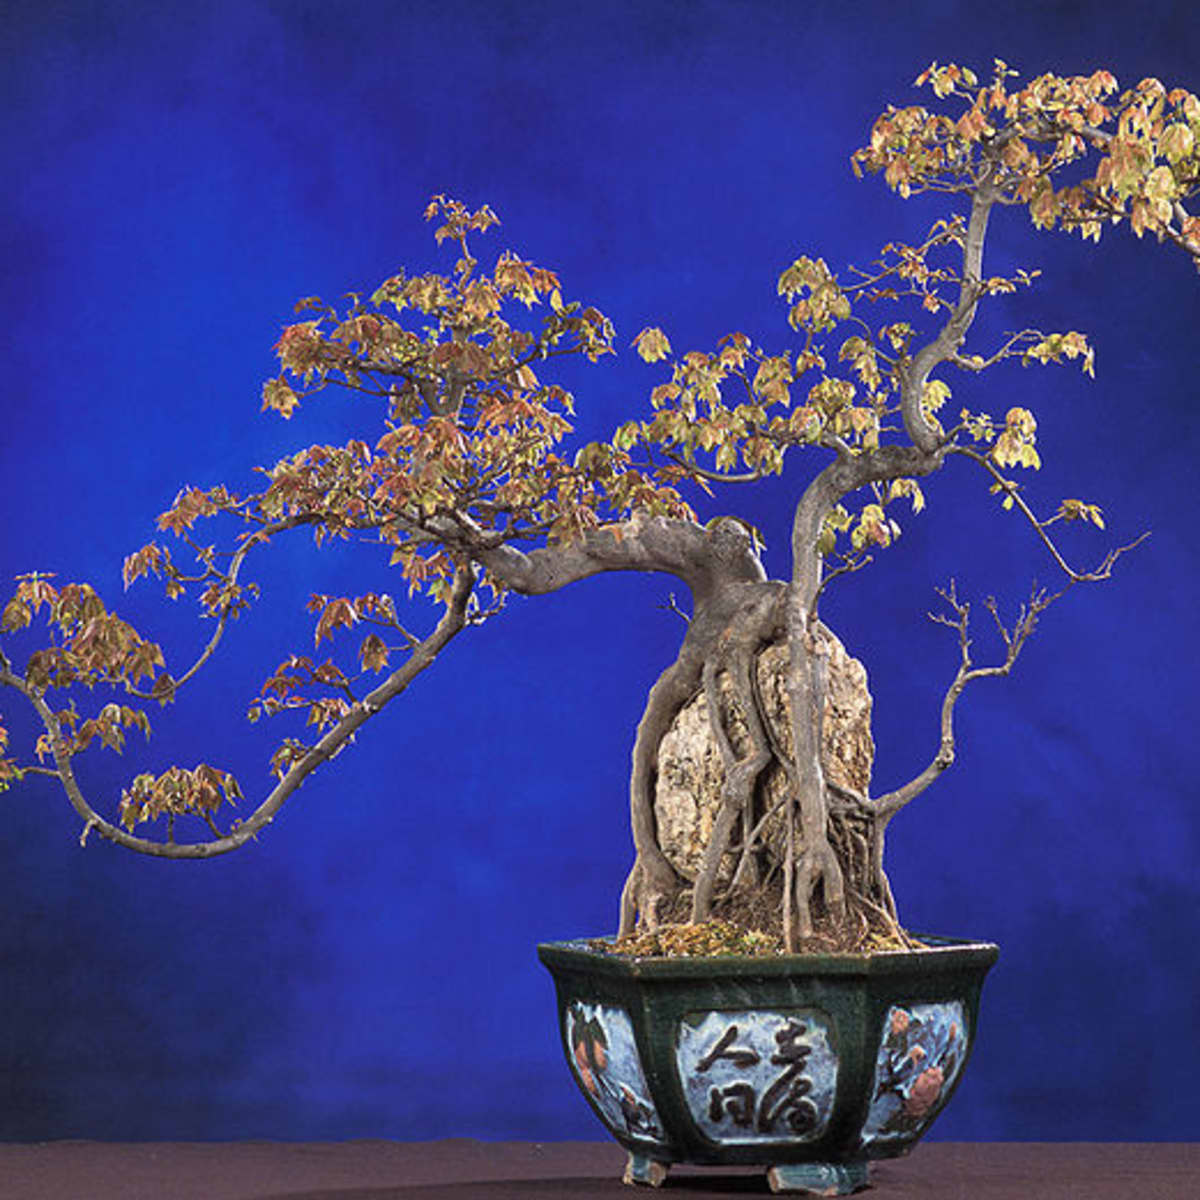 Stay Calm, Cool and Collected with Your Bonsai Tree - Thunderstruck Bonsai